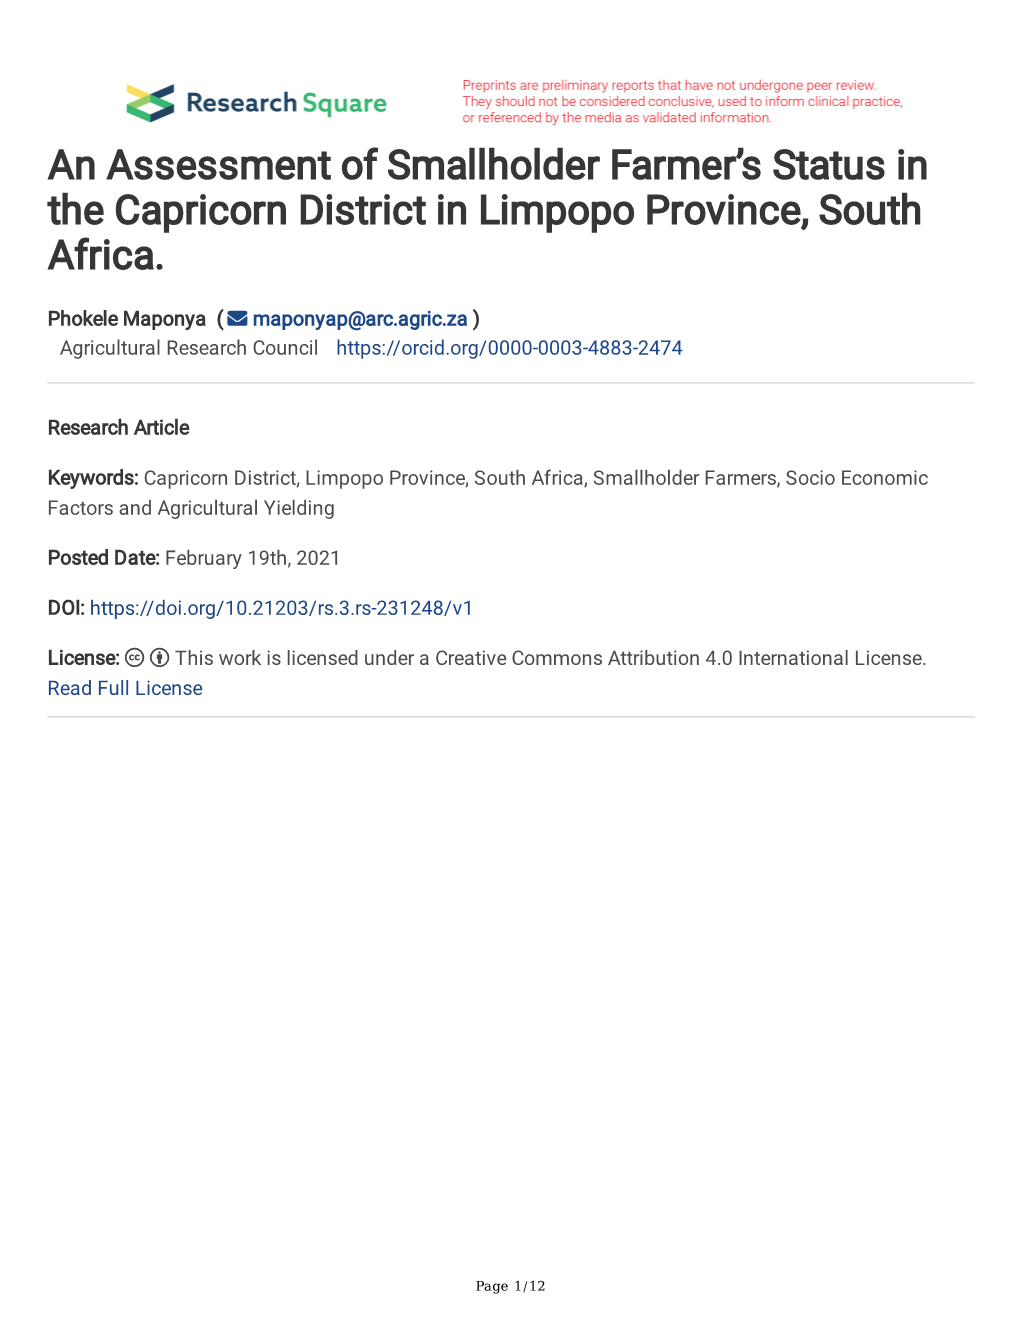 An Assessment of Smallholder Farmer's Status in the Capricorn District in Limpopo Province, South Africa